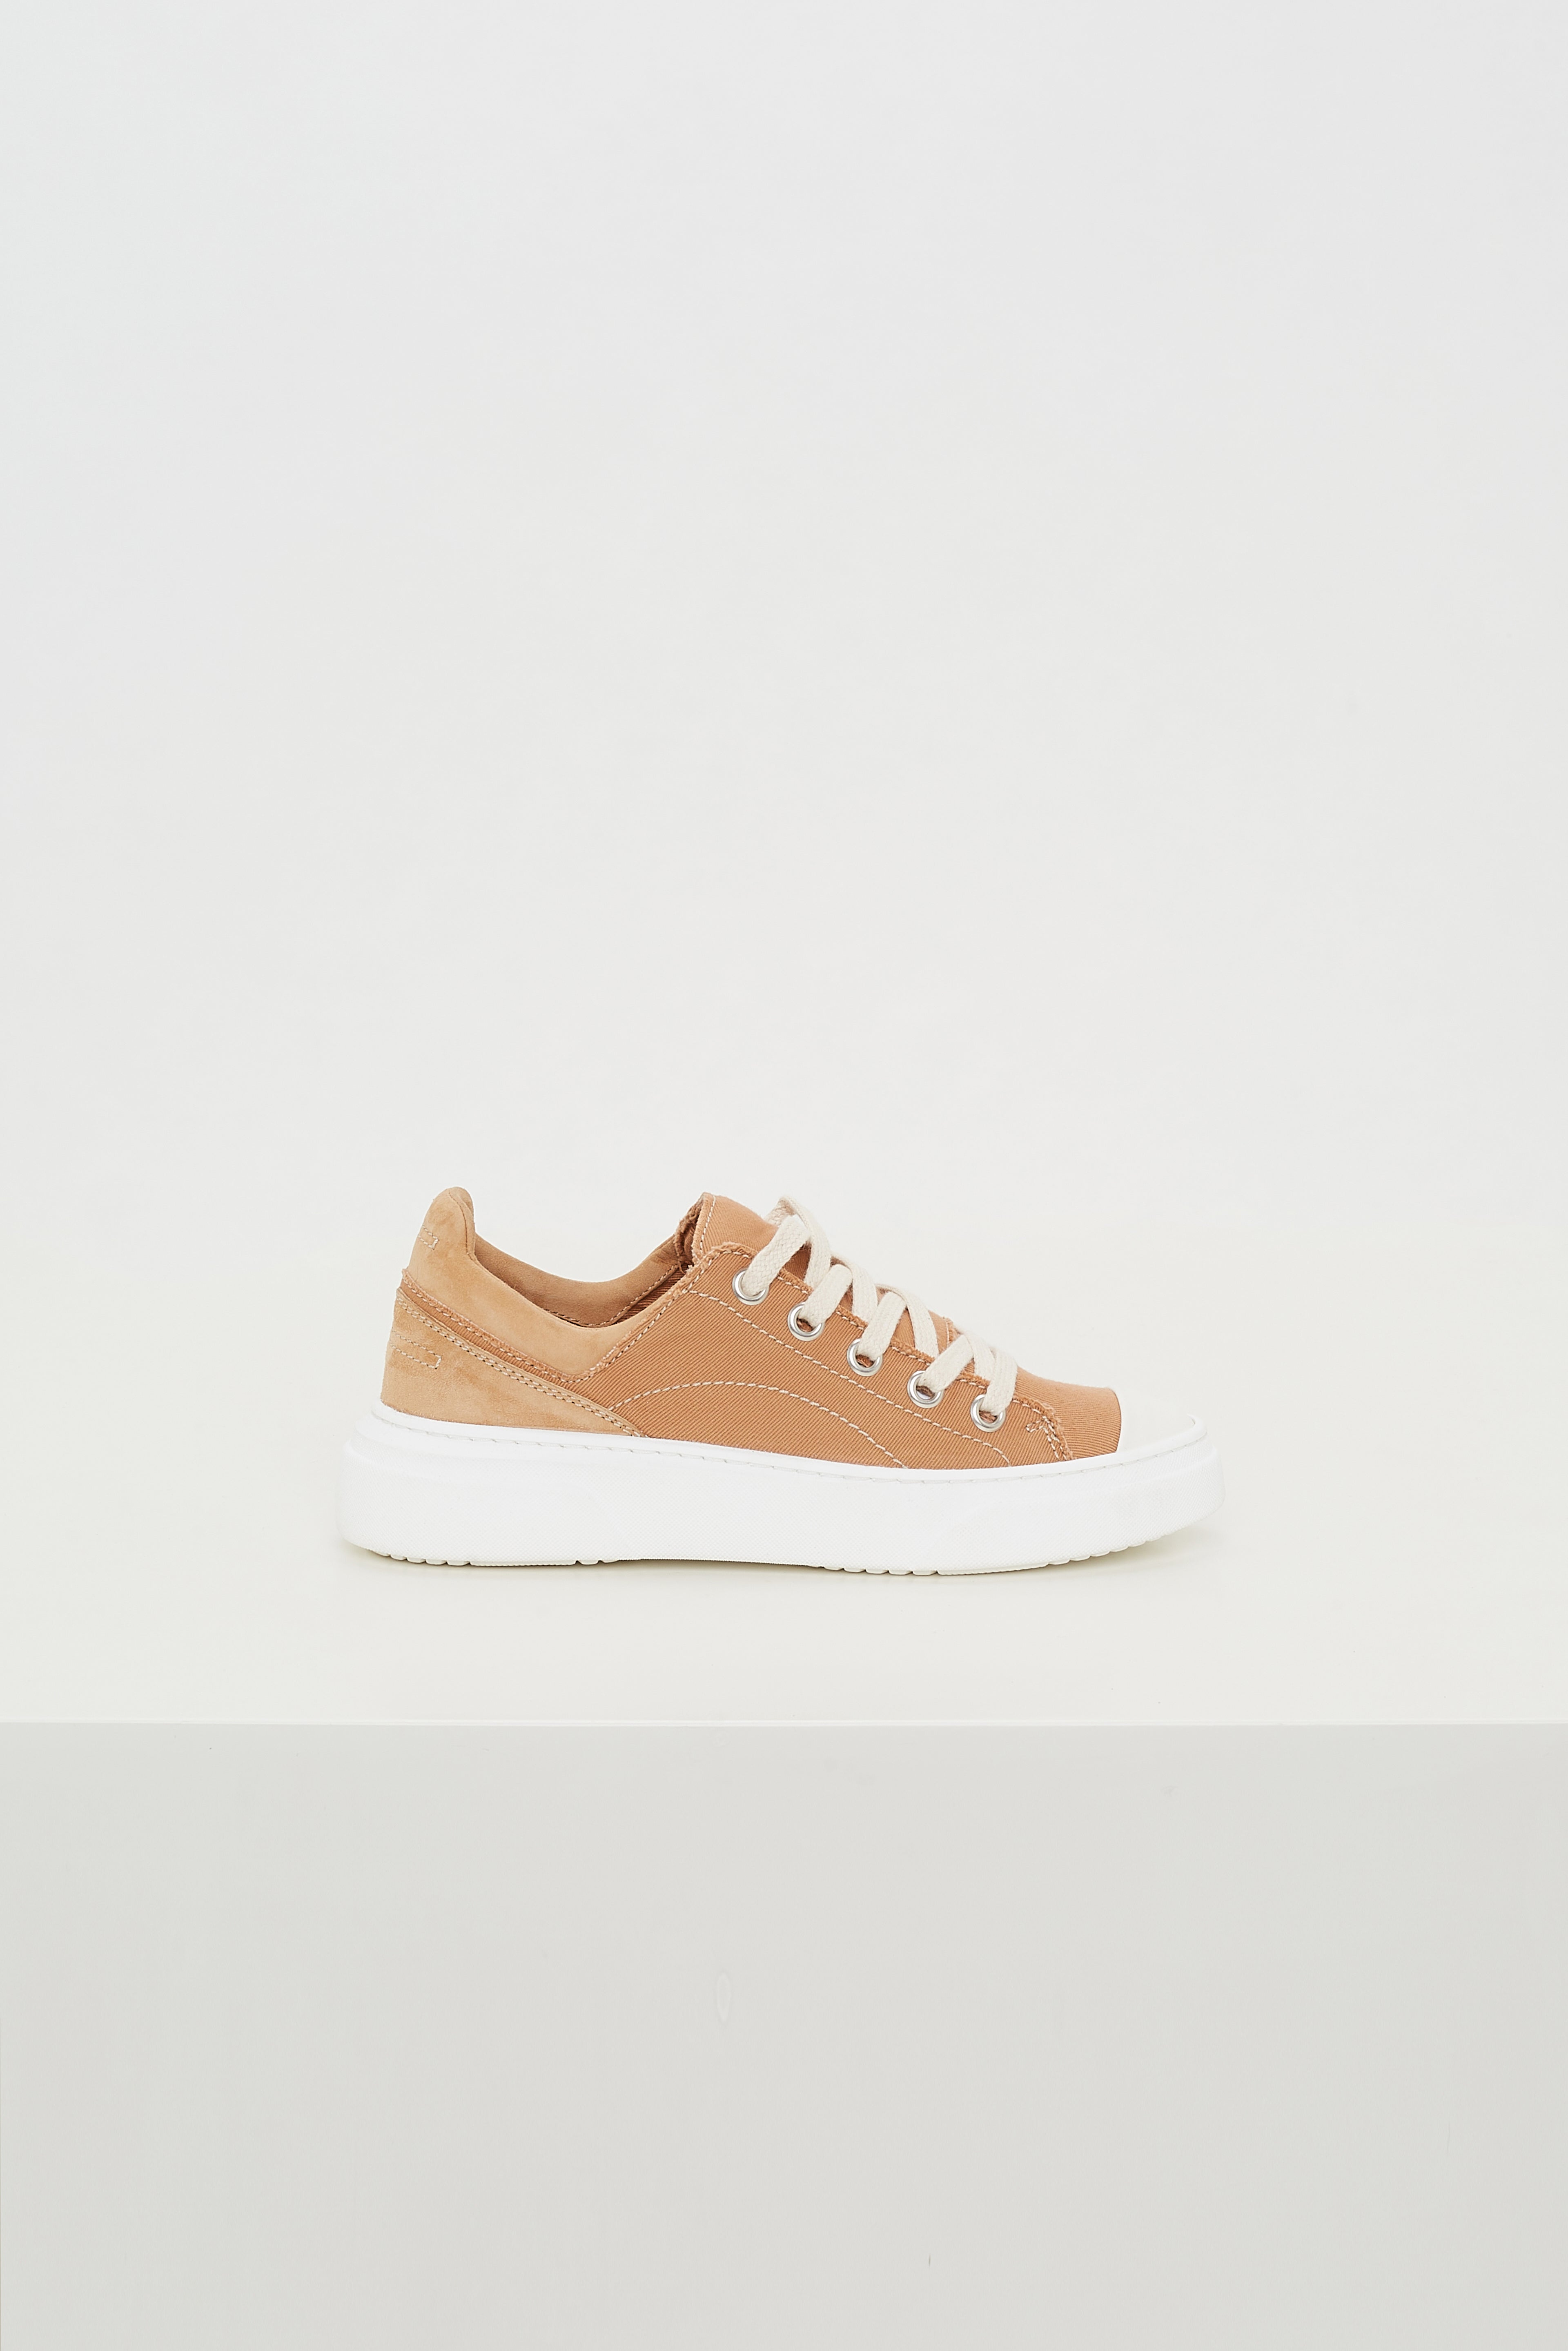 Dorothee-Schumacher-OUTLET-SALE-CANVAS-COOLNESS-Sneaker-Sneakers-ARCHIVE-COLLECTION-2.jpg